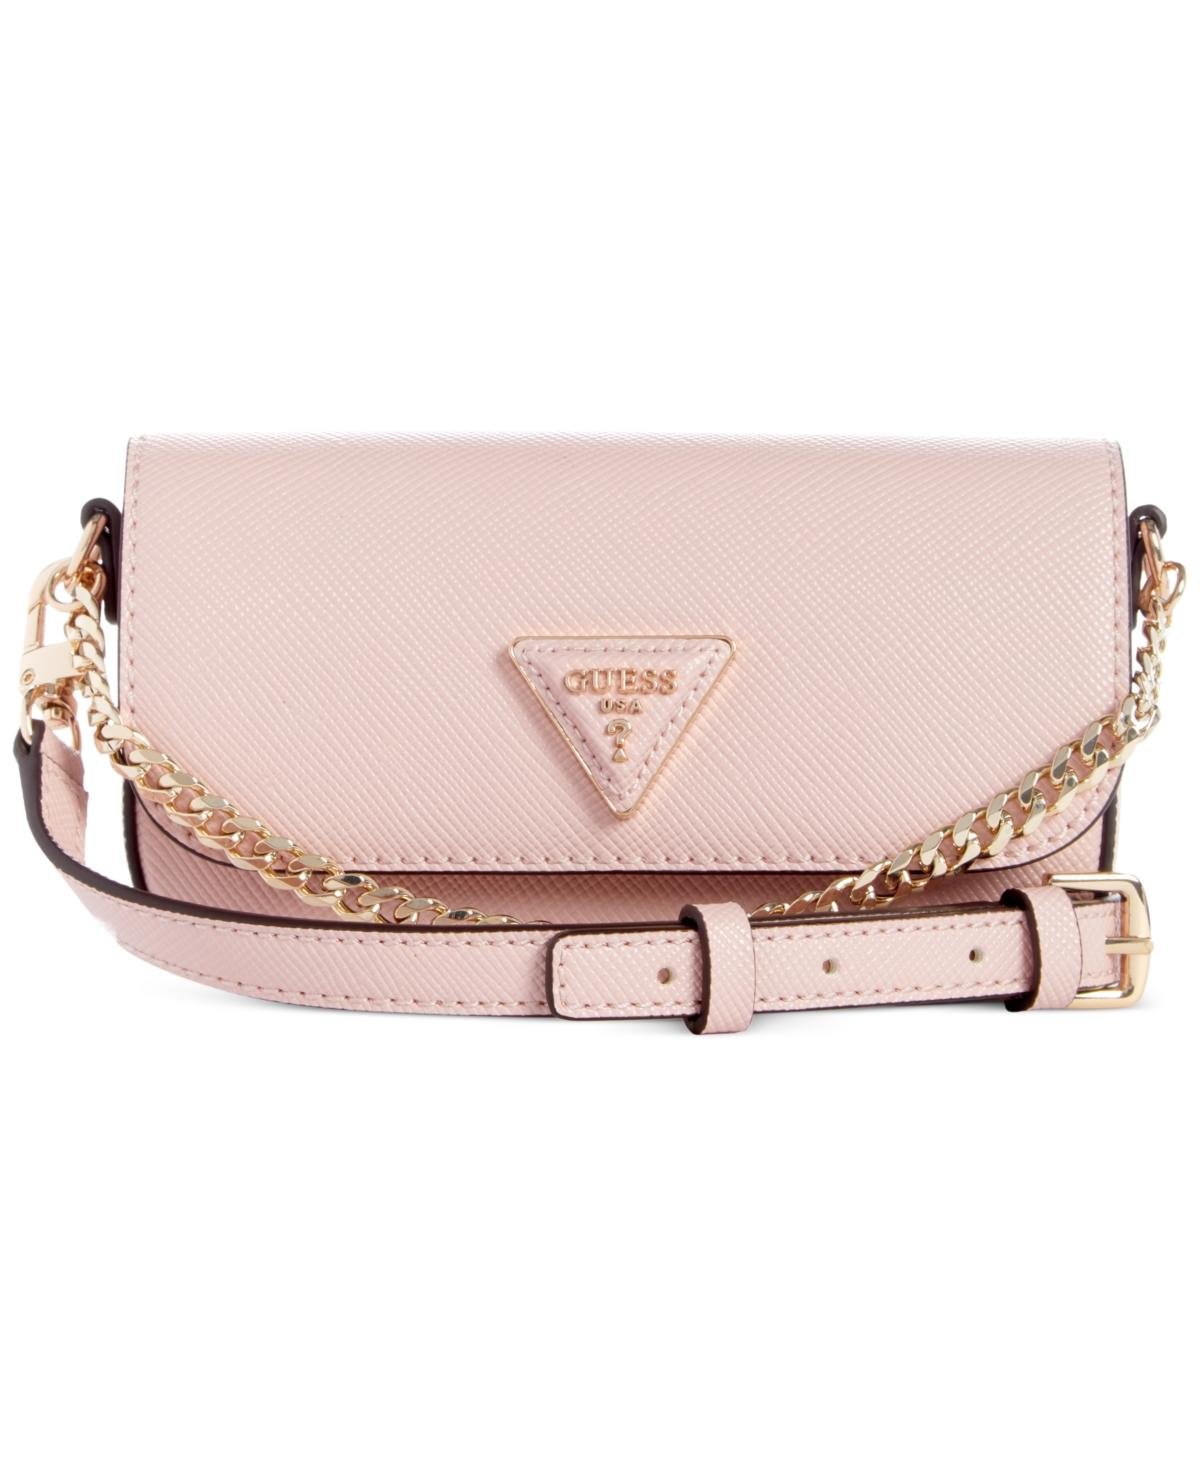 Guess Brynlee Micro Mini Crossbody Bag in Pink